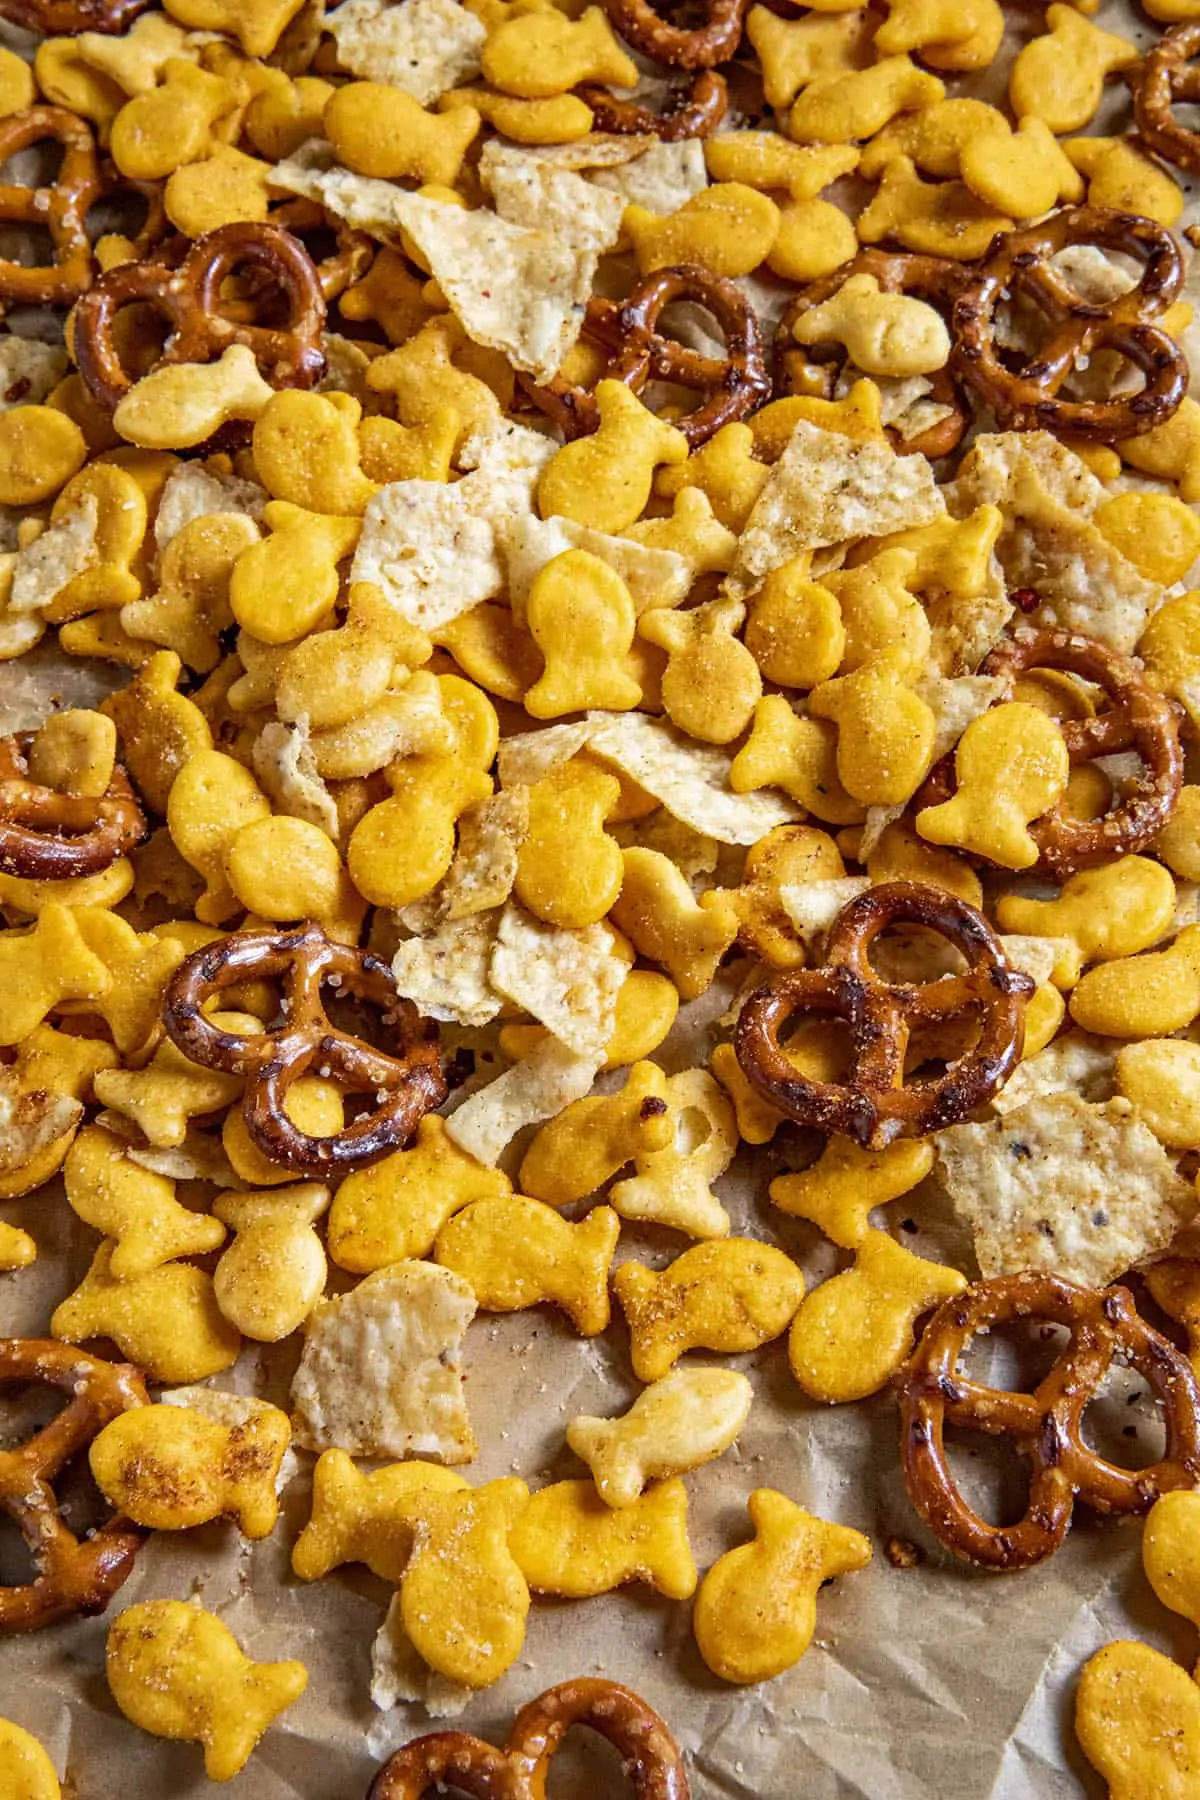 Lots of Homemade Spicy Snack Mix on a serving tray